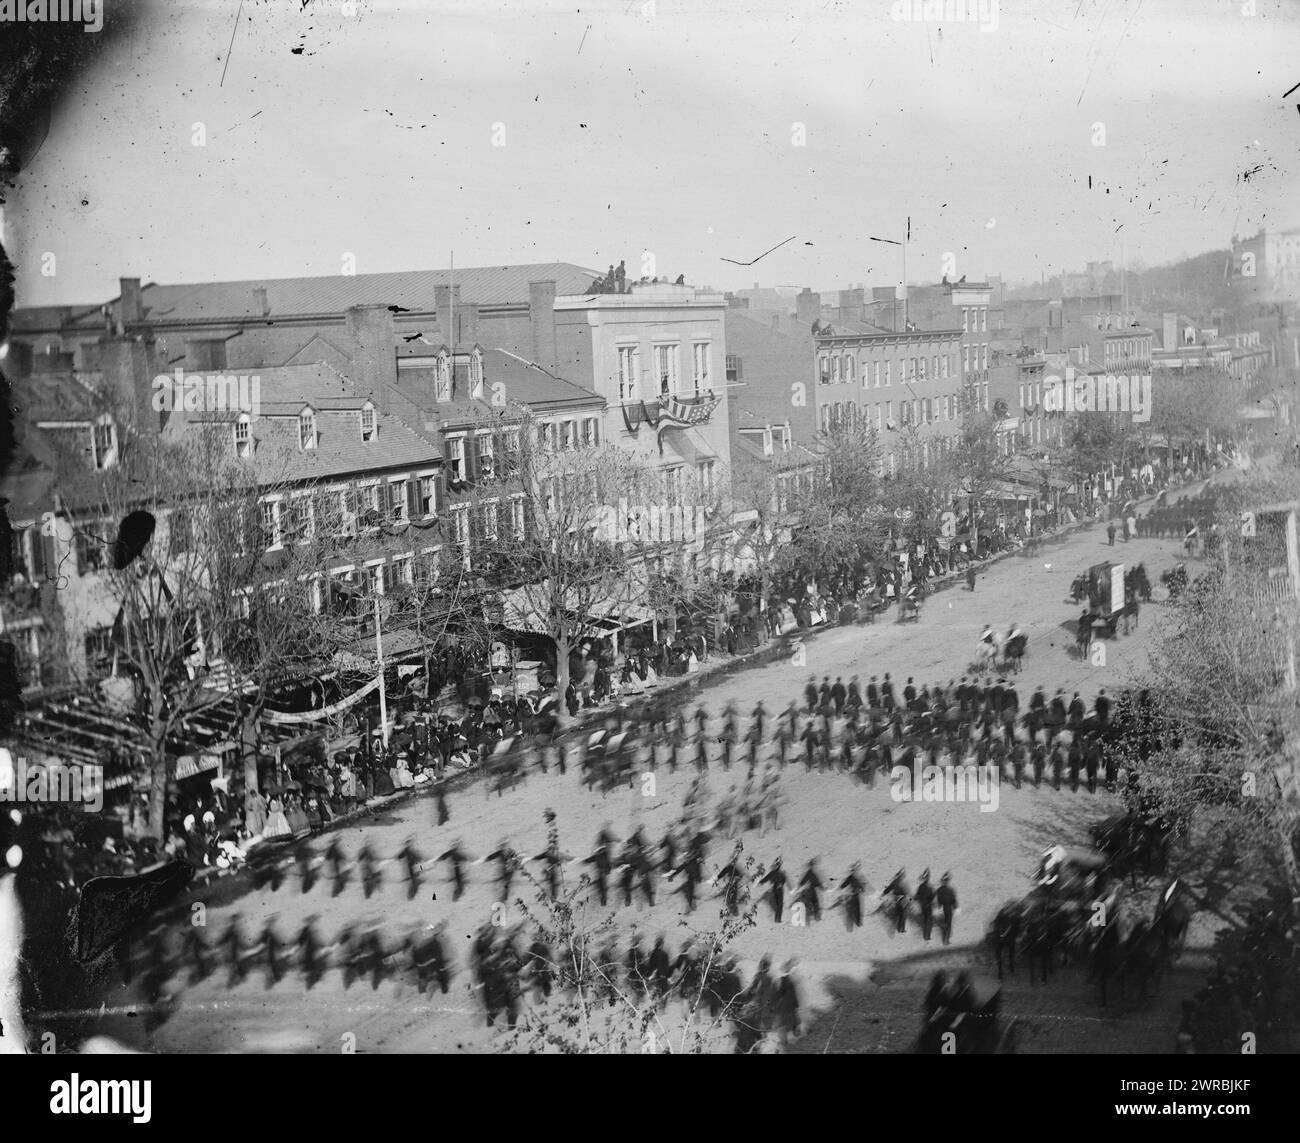 Washington, D.C. President Lincoln's funeral procession on Pennsylvania Avenue; another view, Photograph of Washington, 1862-1865, the assassination of President Lincoln, April-July 1865., 1865 April 19., United States, History, Civil War, 1861-1865, Glass negatives, 1860-1870, Stereographs, 1860-1870, 1 negative: glass, stereograph, wet collodion, 4 x 10 in Stock Photo